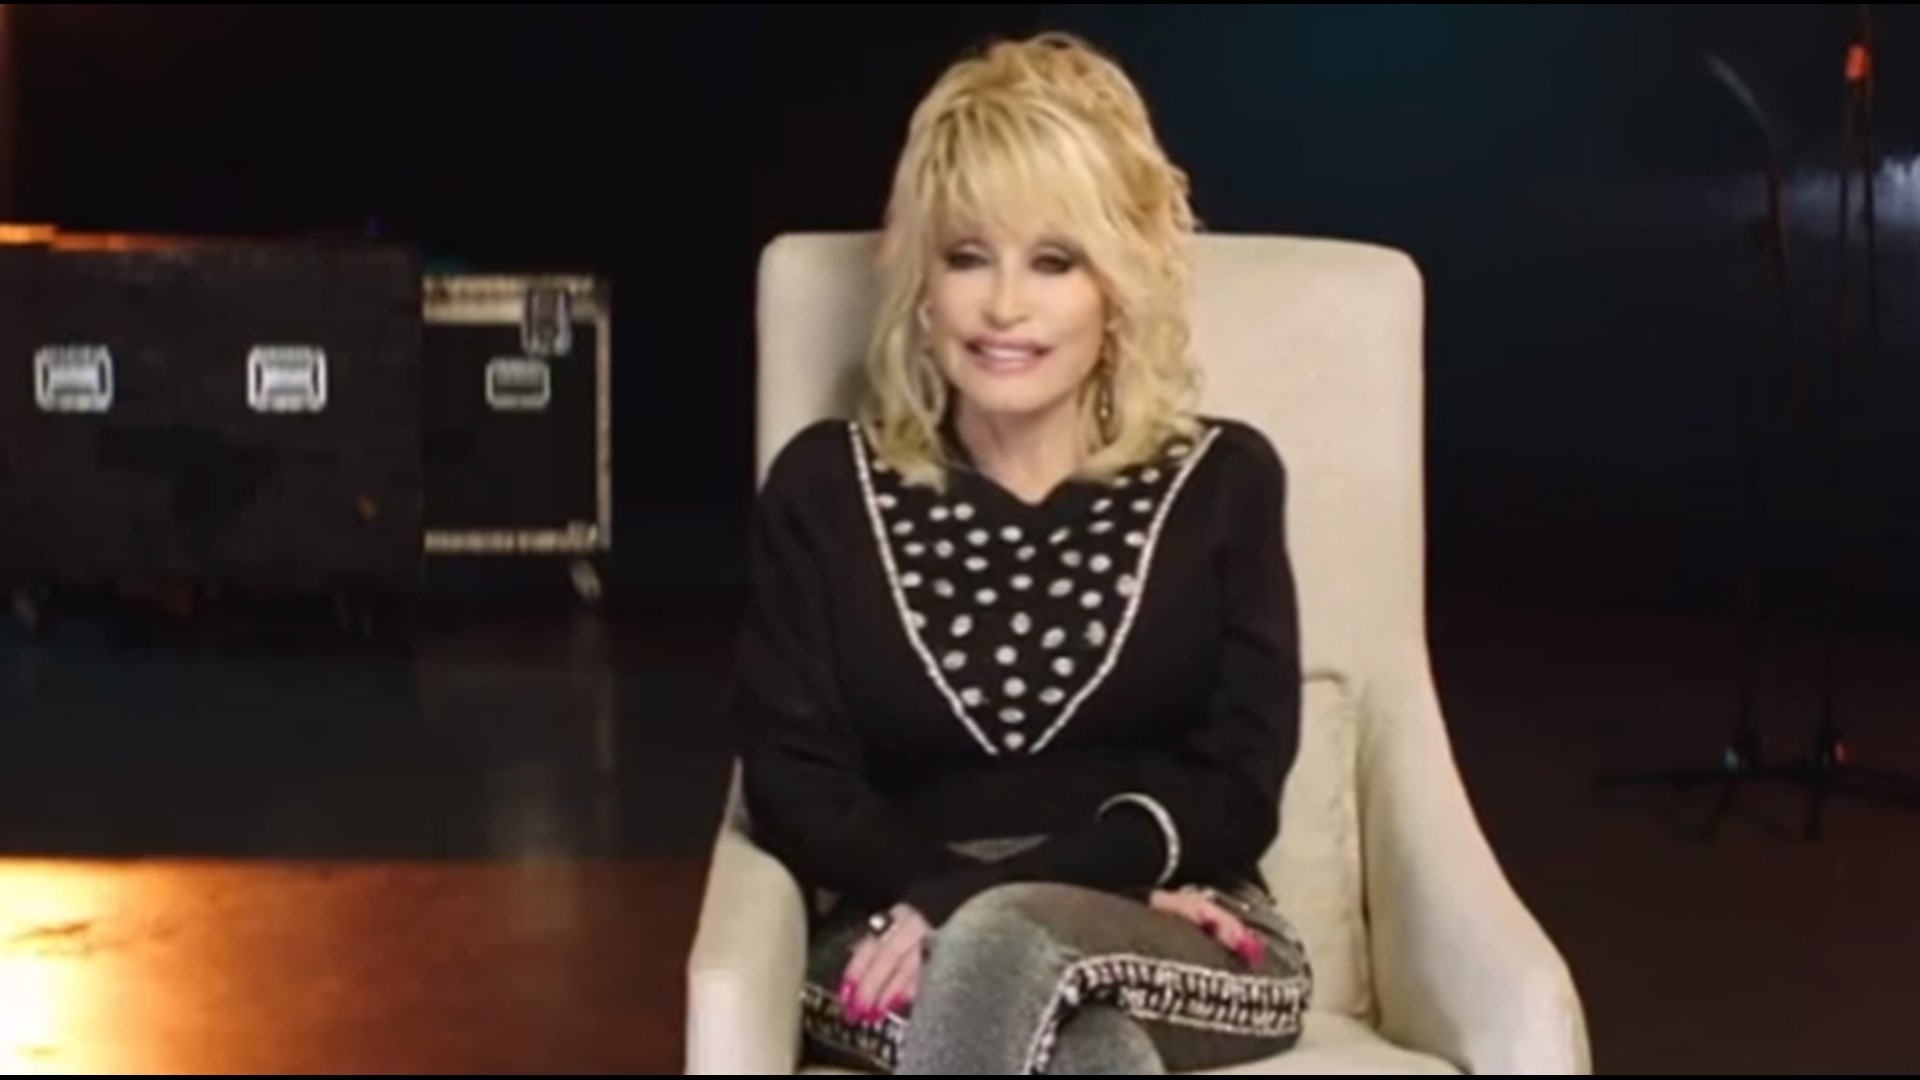 We caught up with the one and only, Dolly Parton!